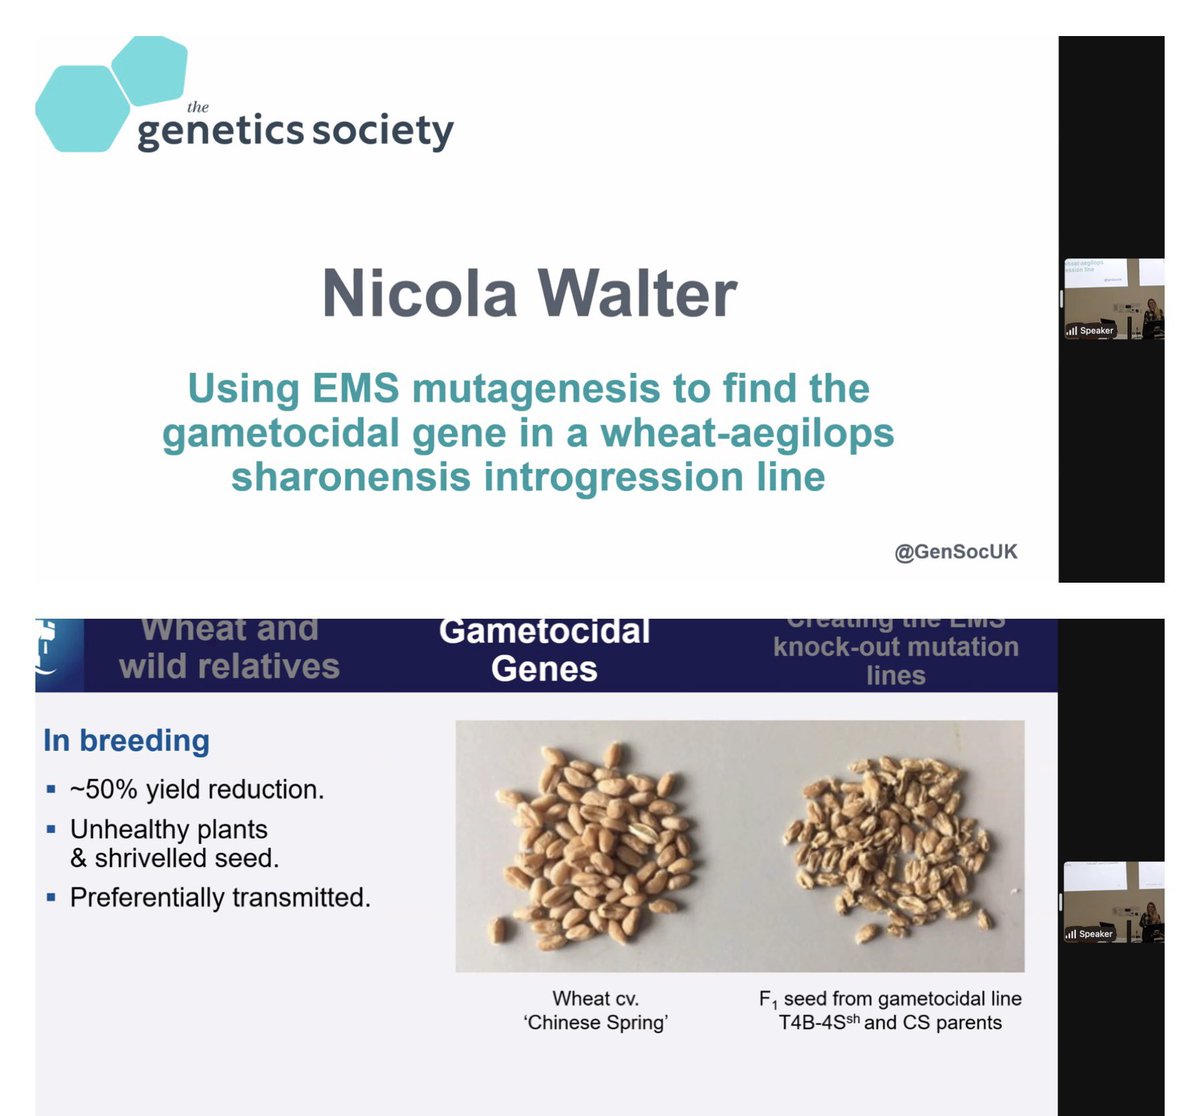 So proud of my PhD student Nikki @NikkiW_Hortic who gave a fantastic talk today on her work on gametocidal genes @GenSocUK conference on the genetics of future food production. Funded by @nottm_bbsrc_dtp and @BBSRC @UoNBiosciences @PlantSciNottm @Notts_WRC #introgressiomics